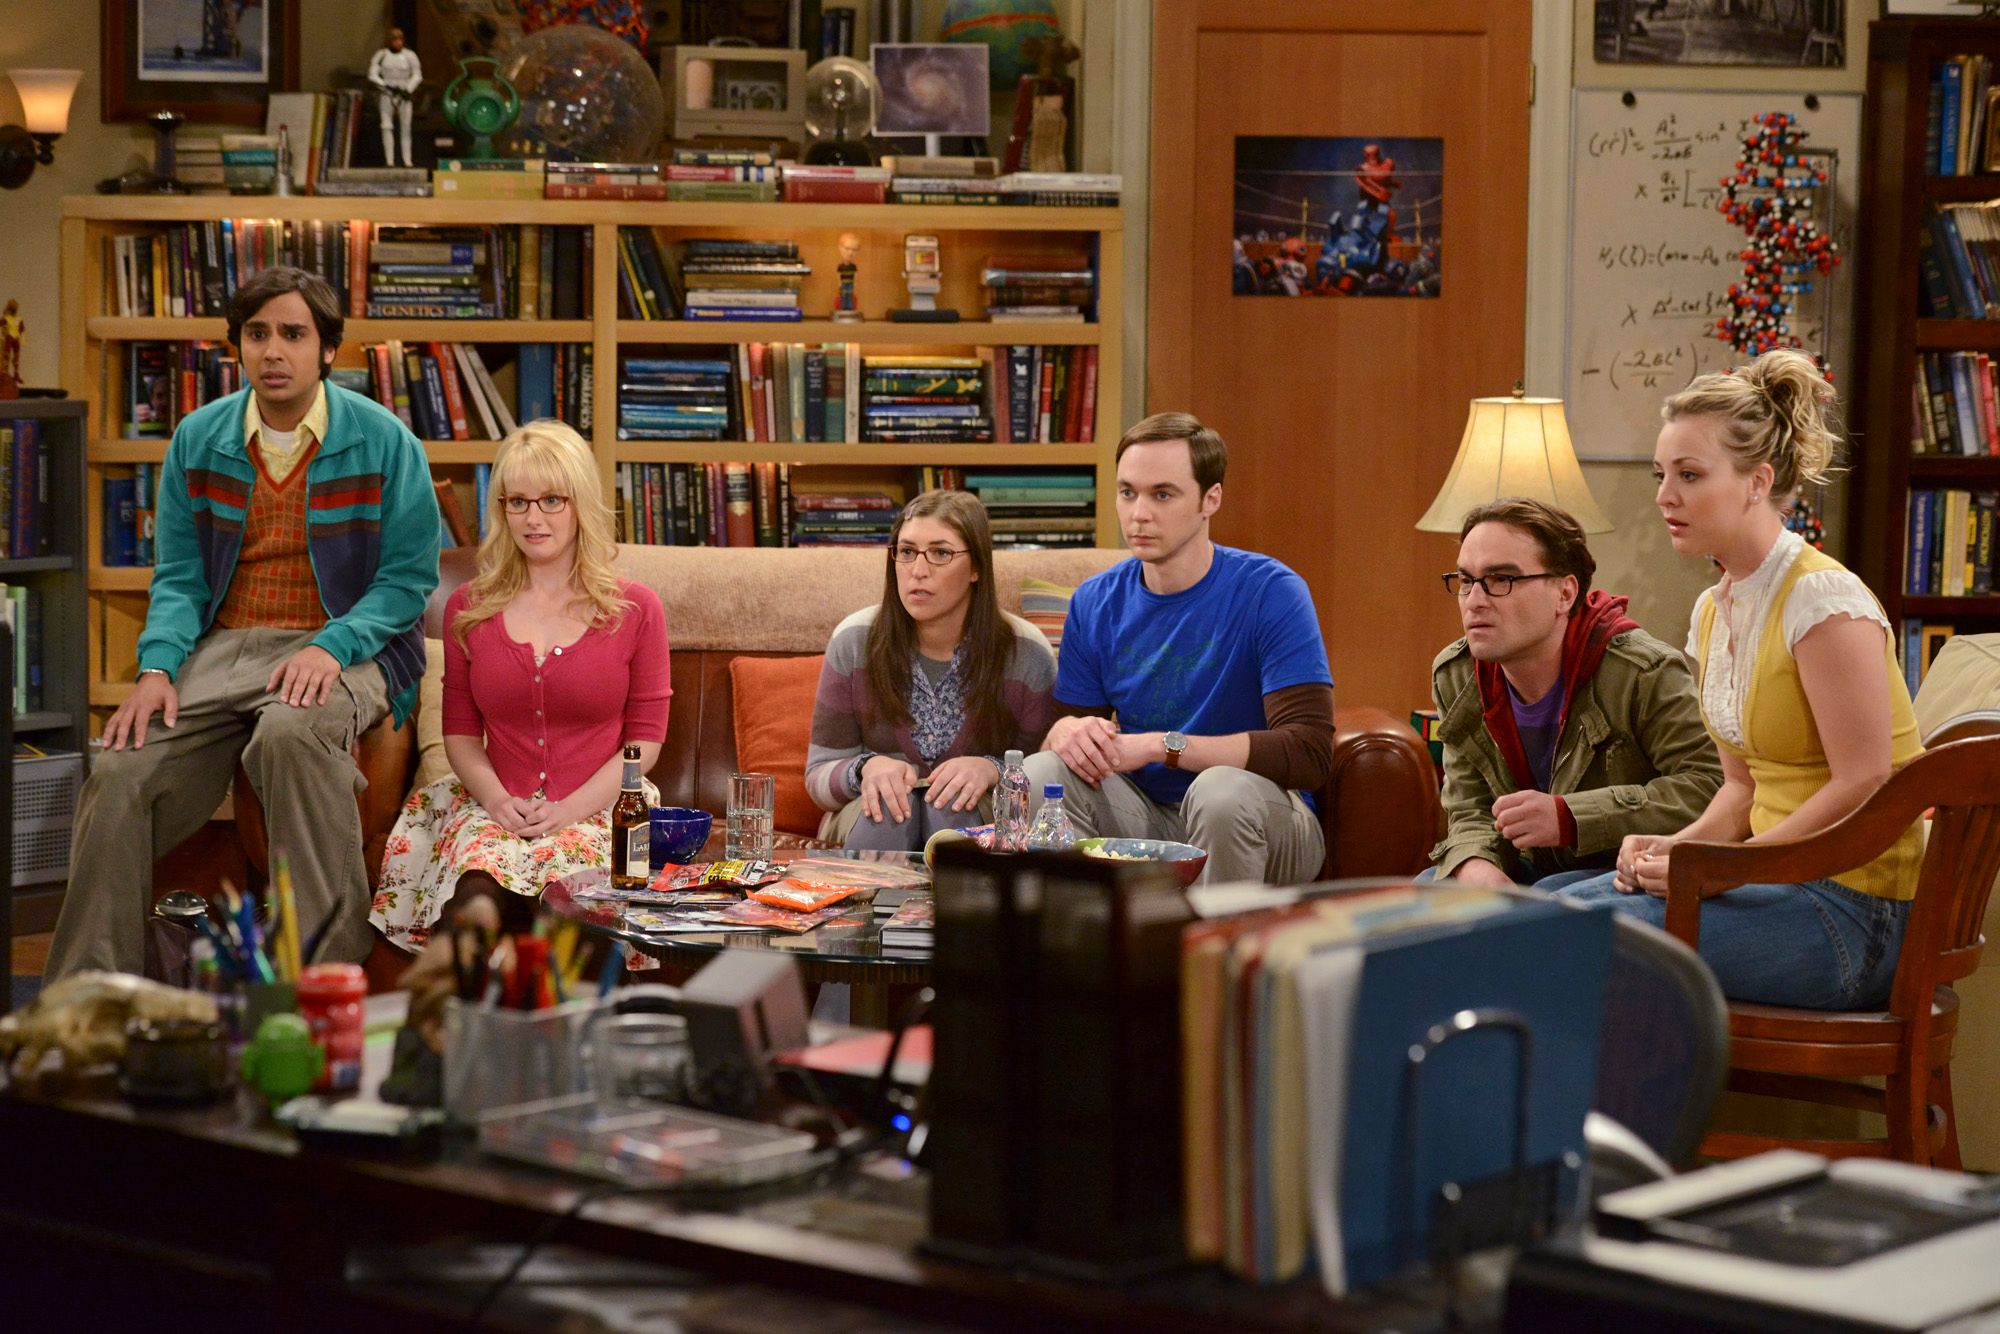 &quot;The Countdown Reflection&quot; -- When Howard and Bernadette decide they want to be married before his NASA launch, the gang rushes to put on a wedding, on the fifth season finale of THE BIG BANG THEORY, Thursday, May 10 (8:00 - 8:31 PM, ET/PT) on the CBS Television Network. Pictured (left to right): Kunal Nayyar, Melissa Rauch, Mayim Bialik, Jim Parsons, Johnny Galecki, Kaley Cuoco. Photo: Michael Yarish/CBS Ã?Â©2012 CBS Broadcasting, Inc. All Rights Reserved.